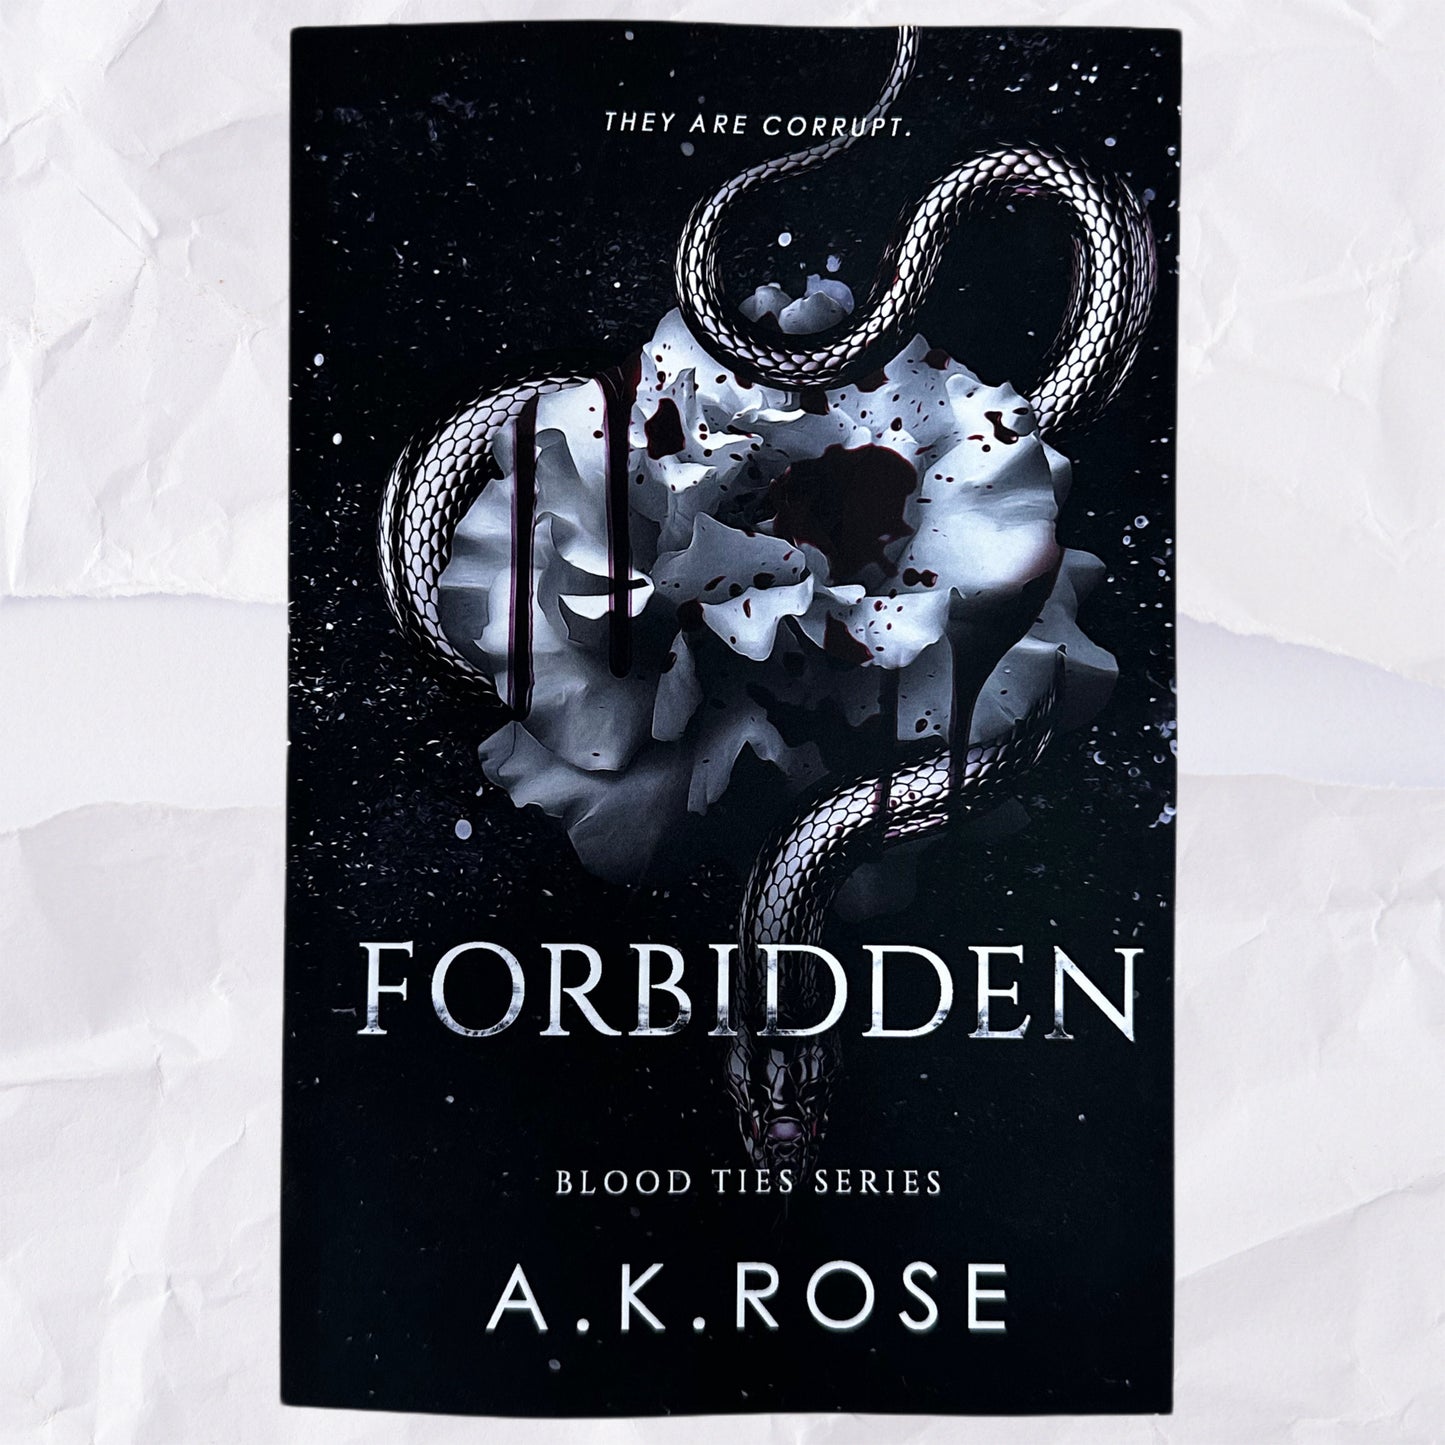 Forbidden (Blood Ties #7) by A.K. Rose